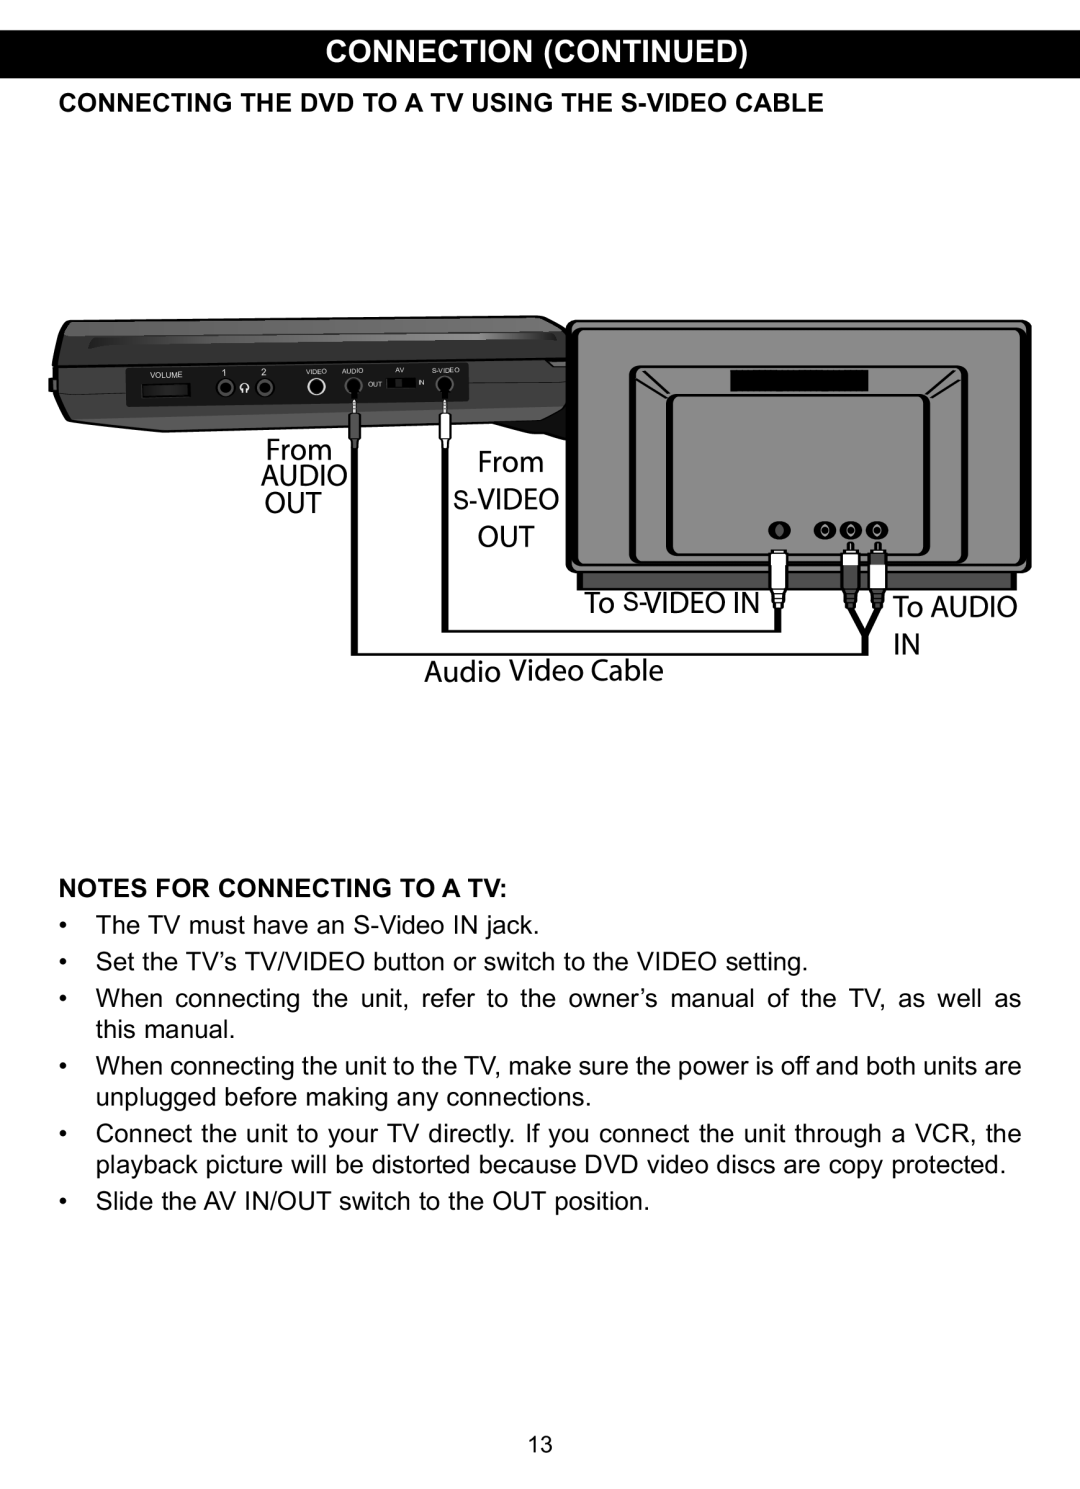 Memorex MVDP1088 manual Notes For Connecting To A Tv 